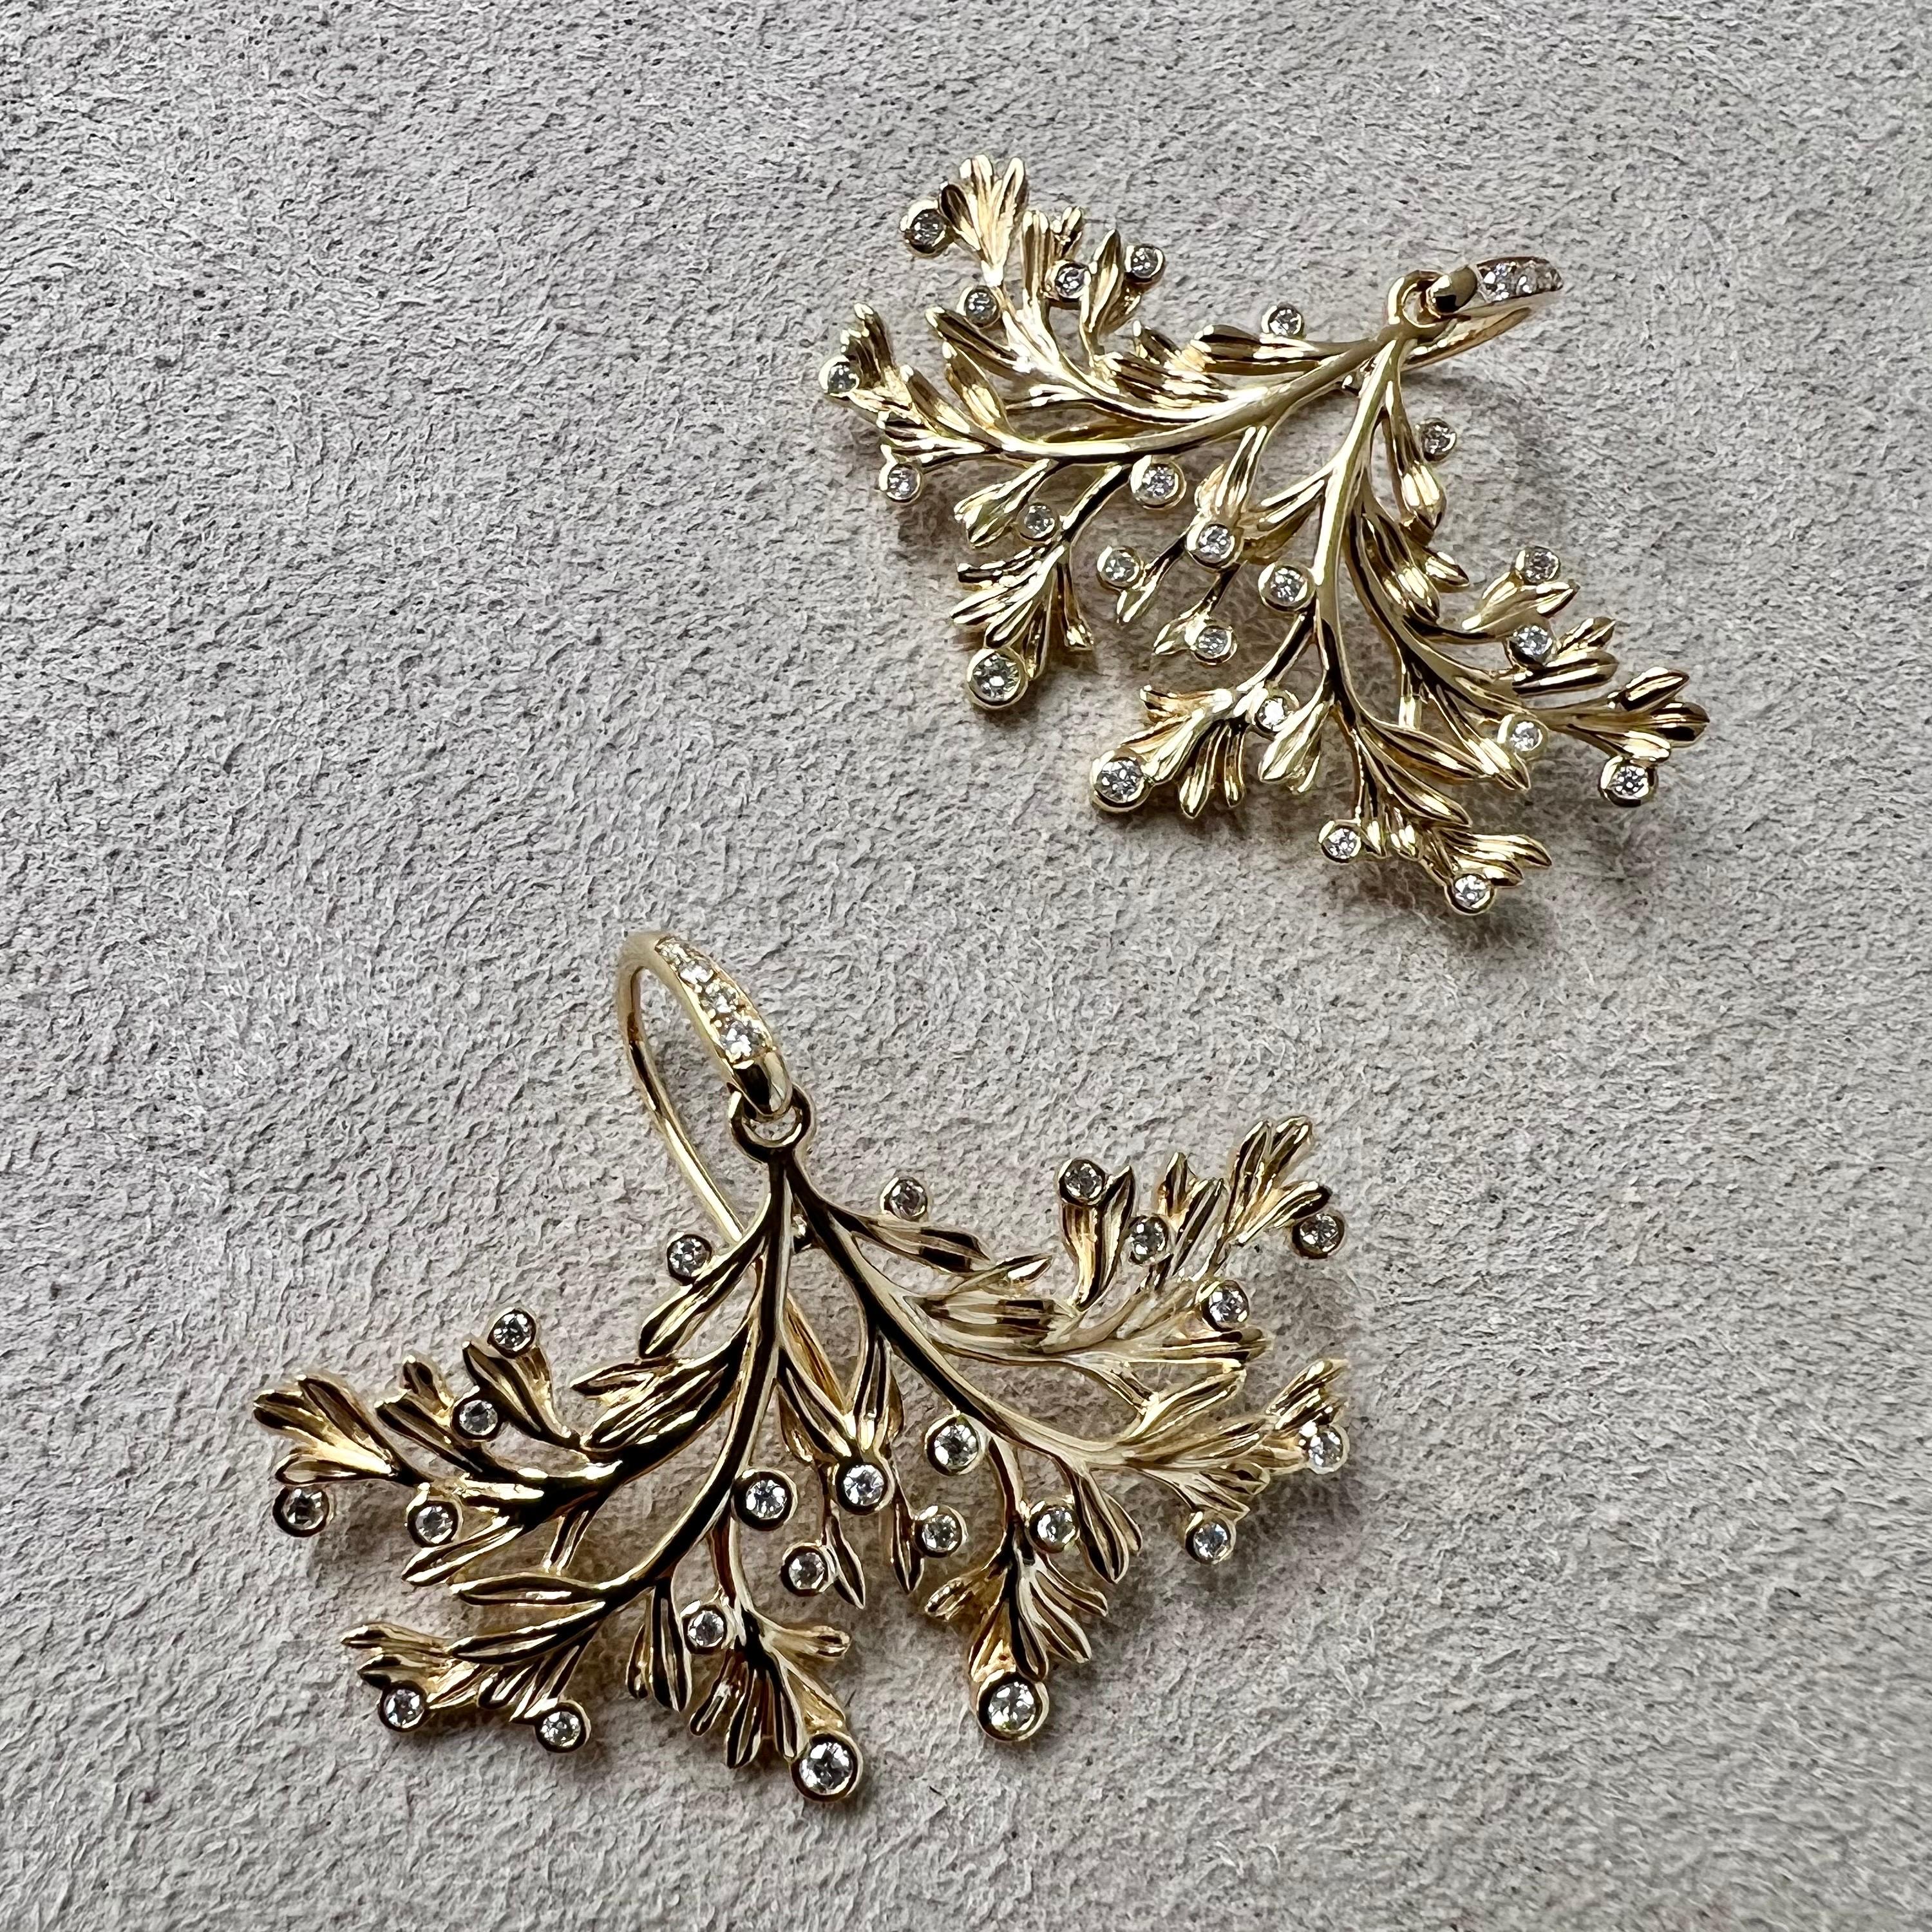 Created in 18 karat yellow gold
Champagne diamonds 0.35 carat approx.
French wire for pierced ears
Limited edition


About the Designers ~ Dharmesh & Namrata

Drawing inspiration from little things, Dharmesh & Namrata Kothari have created an